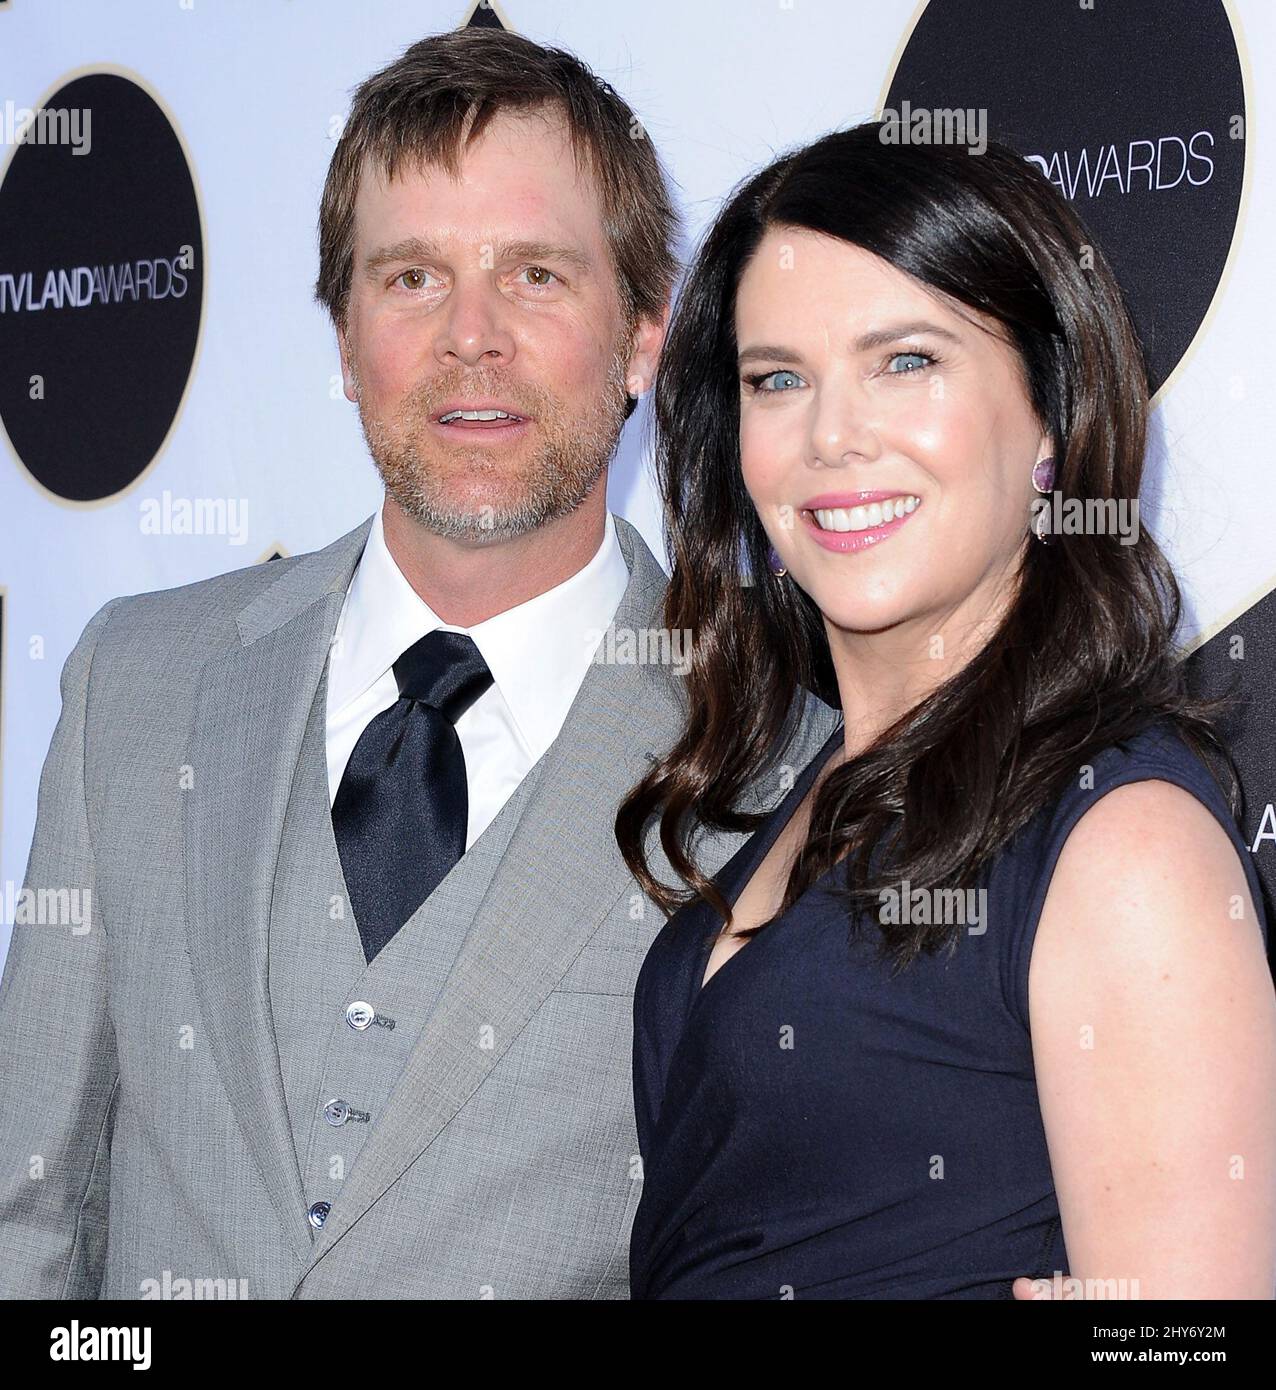 Peter Krause, Lauren Graham attending 2015 TV LAND Awards - Arrivals held at Saban Theatre in Los Angeles, USA. Stock Photo